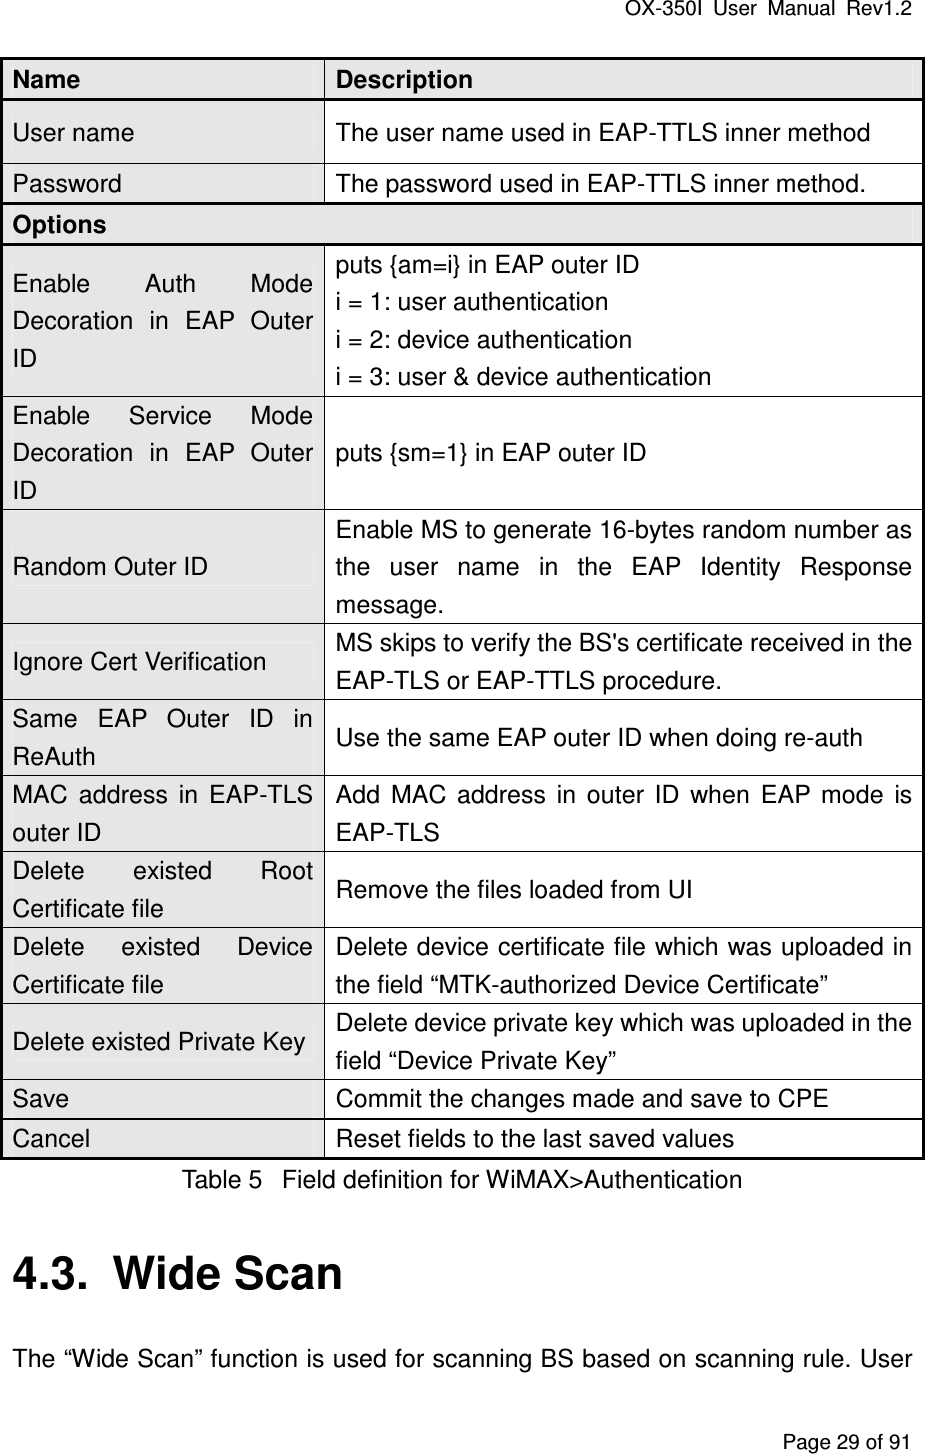 OX-350I  User  Manual  Rev1.2 Page 29 of 91 Name  Description User name  The user name used in EAP-TTLS inner method Password  The password used in EAP-TTLS inner method. Options Enable  Auth  Mode Decoration  in  EAP  Outer ID puts {am=i} in EAP outer ID i = 1: user authentication i = 2: device authentication i = 3: user &amp; device authentication Enable  Service  Mode Decoration  in  EAP  Outer ID puts {sm=1} in EAP outer ID Random Outer ID Enable MS to generate 16-bytes random number as the  user  name  in  the  EAP  Identity  Response message. Ignore Cert Verification  MS skips to verify the BS&apos;s certificate received in the EAP-TLS or EAP-TTLS procedure. Same  EAP  Outer  ID  in ReAuth  Use the same EAP outer ID when doing re-auth MAC  address  in  EAP-TLS outer ID Add  MAC  address  in  outer  ID  when  EAP  mode  is EAP-TLS Delete  existed  Root Certificate file  Remove the files loaded from UI Delete  existed  Device Certificate file Delete device certificate file which was uploaded in the field “MTK-authorized Device Certificate” Delete existed Private Key Delete device private key which was uploaded in the field “Device Private Key” Save  Commit the changes made and save to CPE Cancel  Reset fields to the last saved values Table 5  Field definition for WiMAX&gt;Authentication 4.3.  Wide Scan The “Wide Scan” function is used for scanning BS based on scanning rule. User 